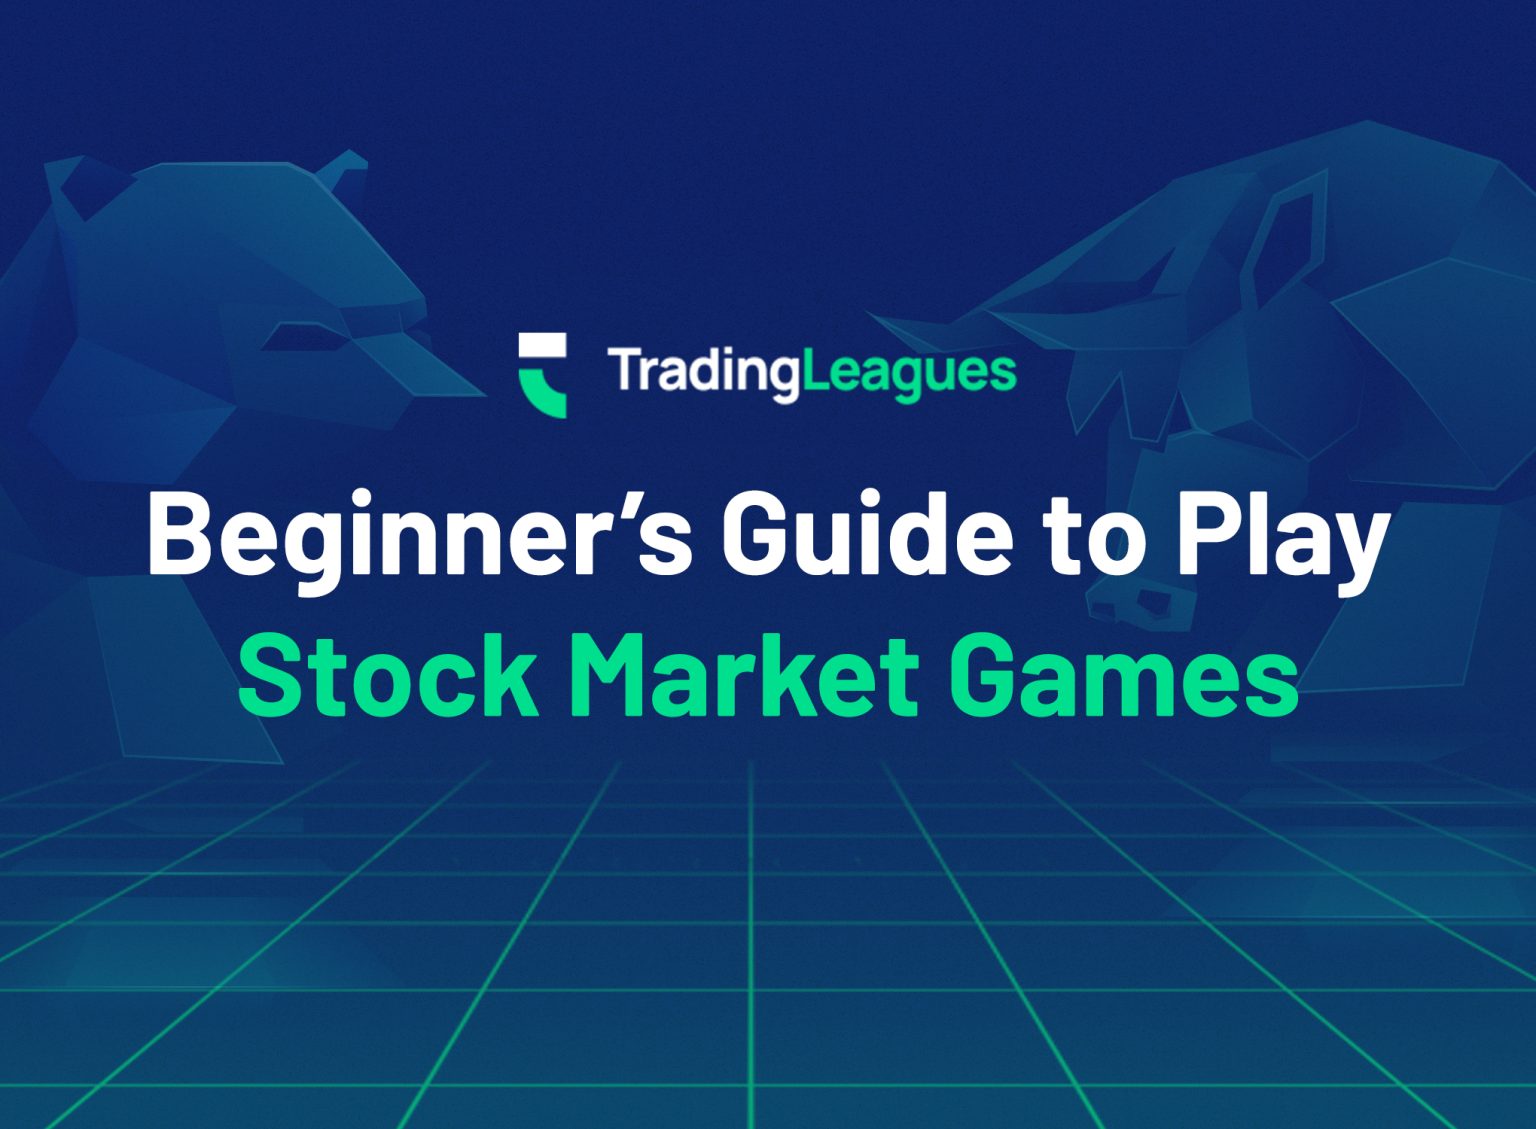 Beginner’s Guide to Play Stock Market Games